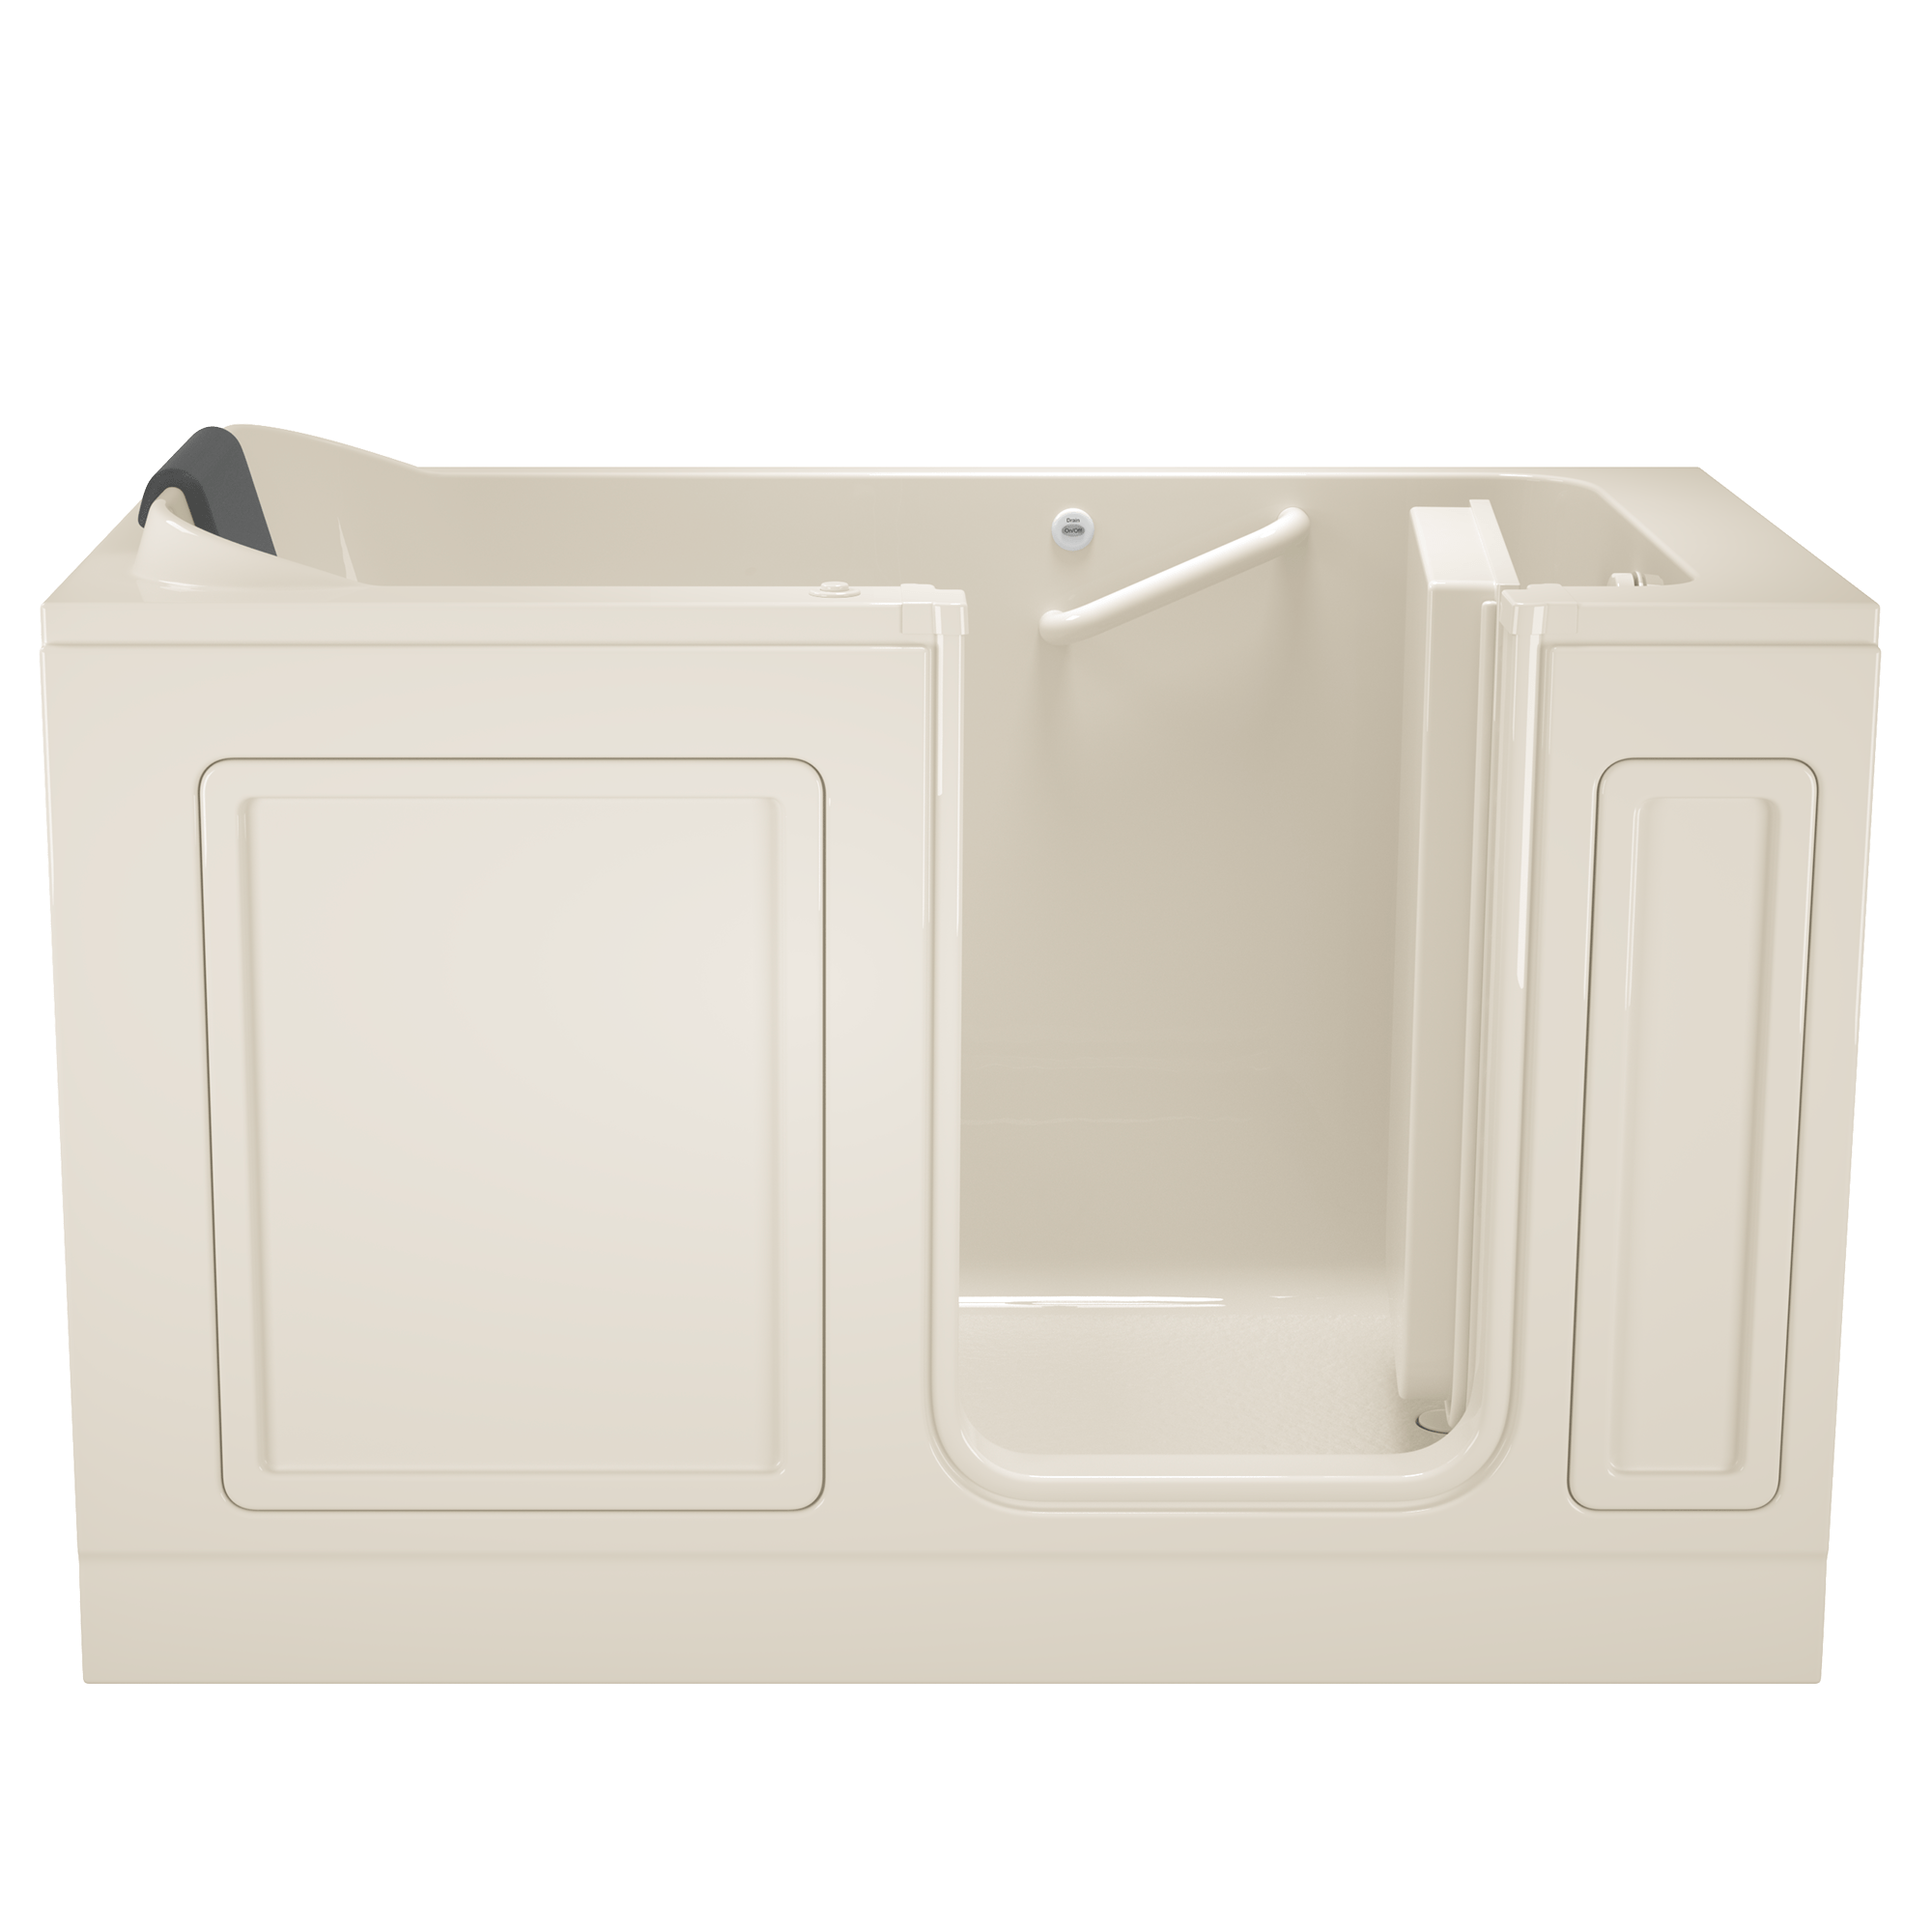 Acrylic Luxury Series 32 x 60  Inch Walk in Tub With Whirlpool System   Right Hand Drain WIB LINEN